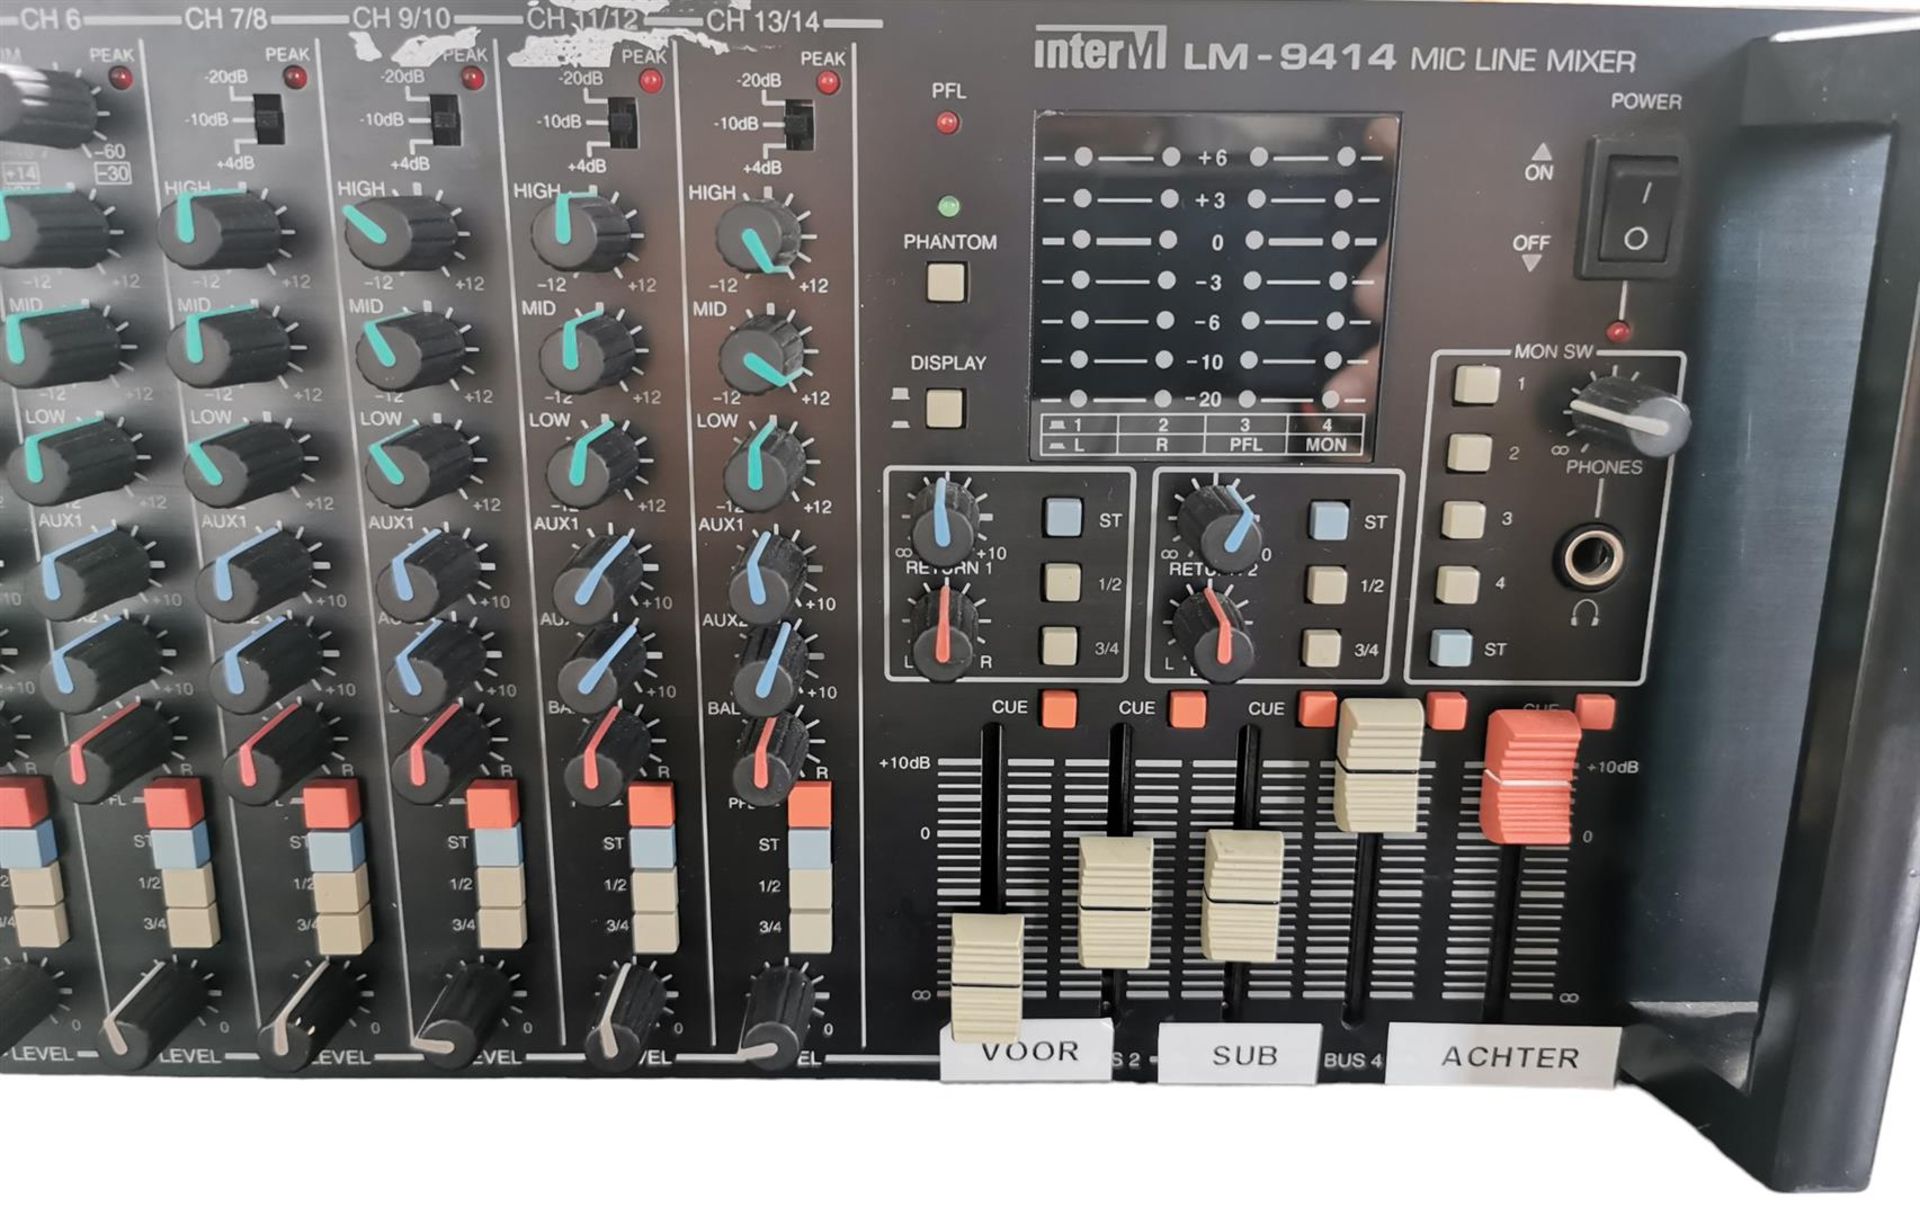 Inter M lm 9414 mixing console. - Image 2 of 3